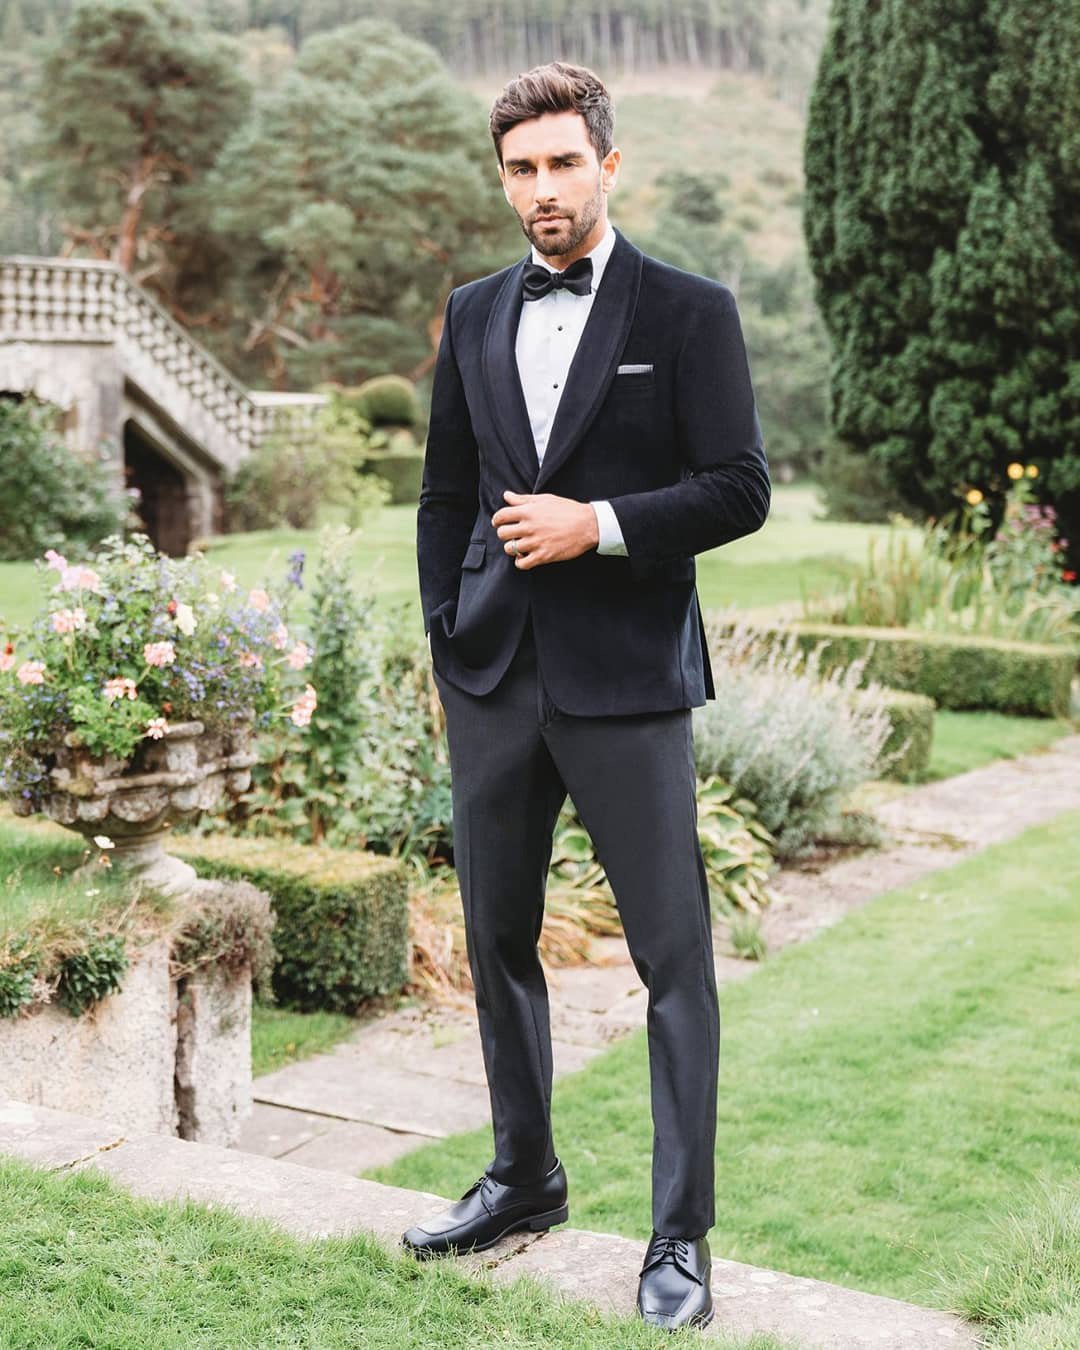 groom suits black jacket with bow tie masculinoformal